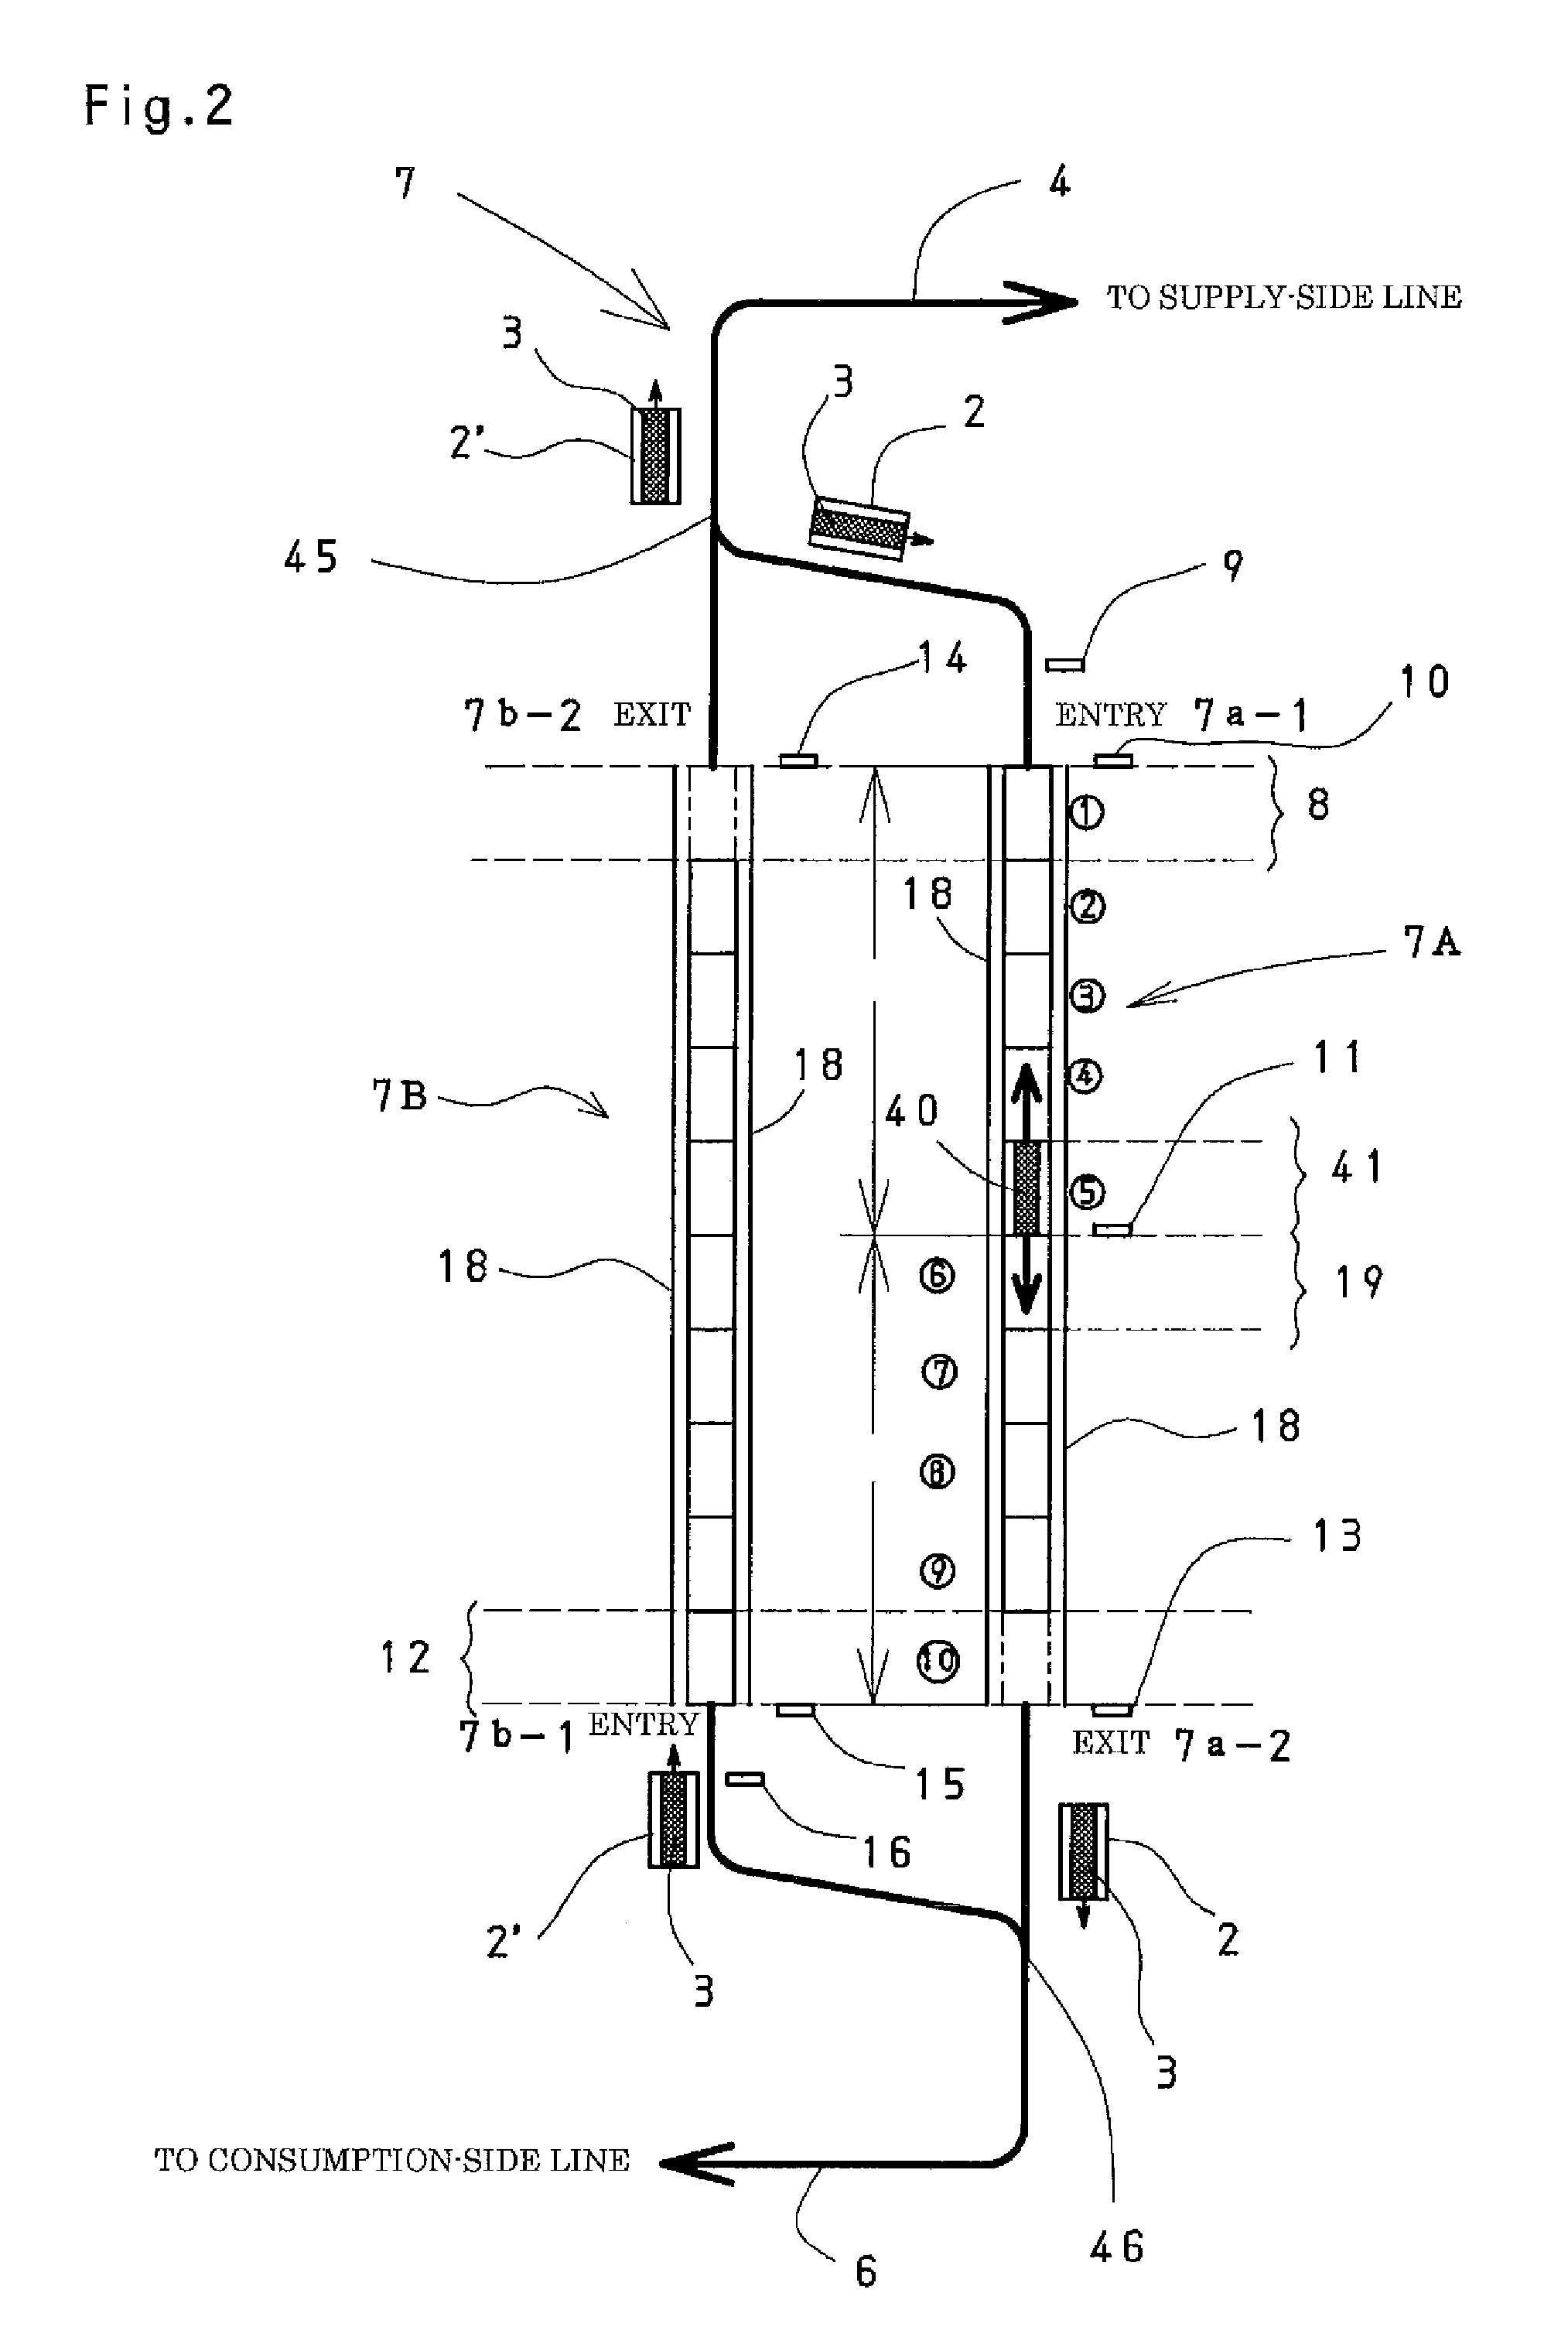 Workpiece transportation system comprising automated transport vehicles and workpiece carriers